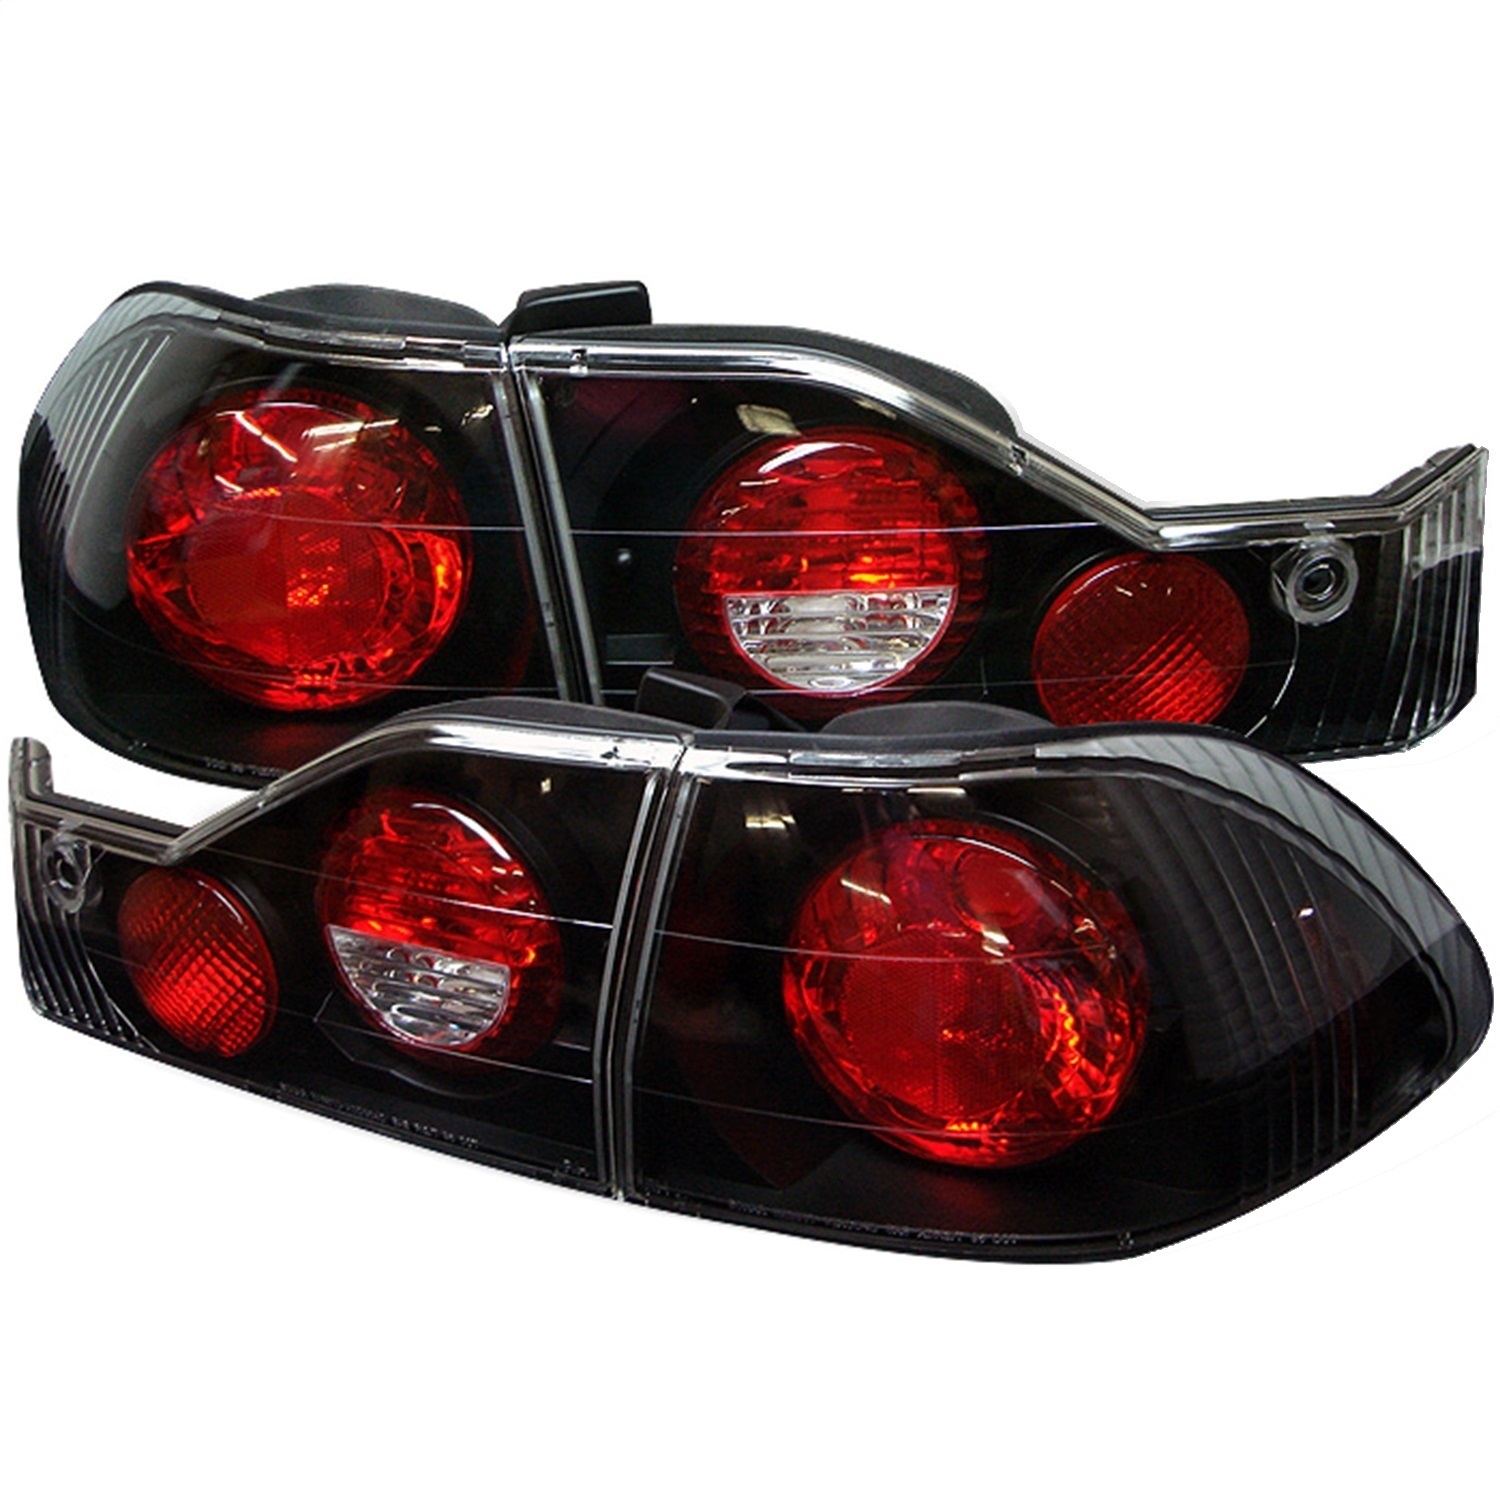 Spyder Auto 5004321 Euro Style Tail Lights Fits 98-00 Accord